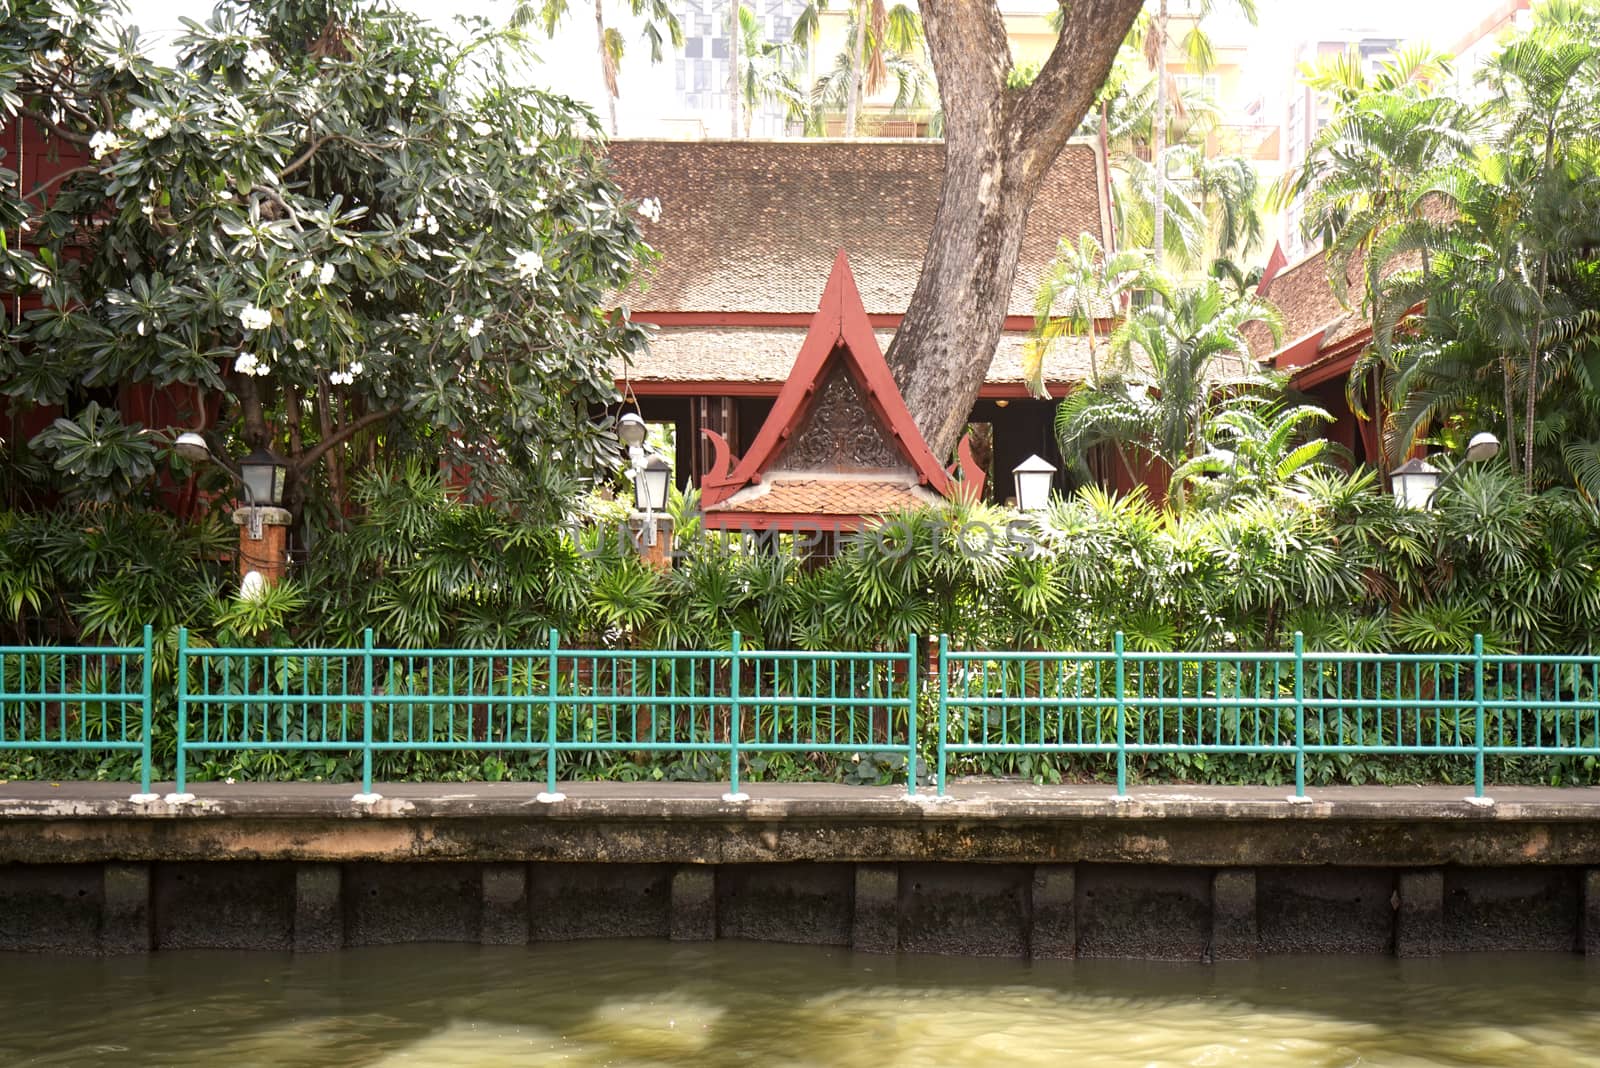 The Thailand temple, river, footpath and tree at daytime